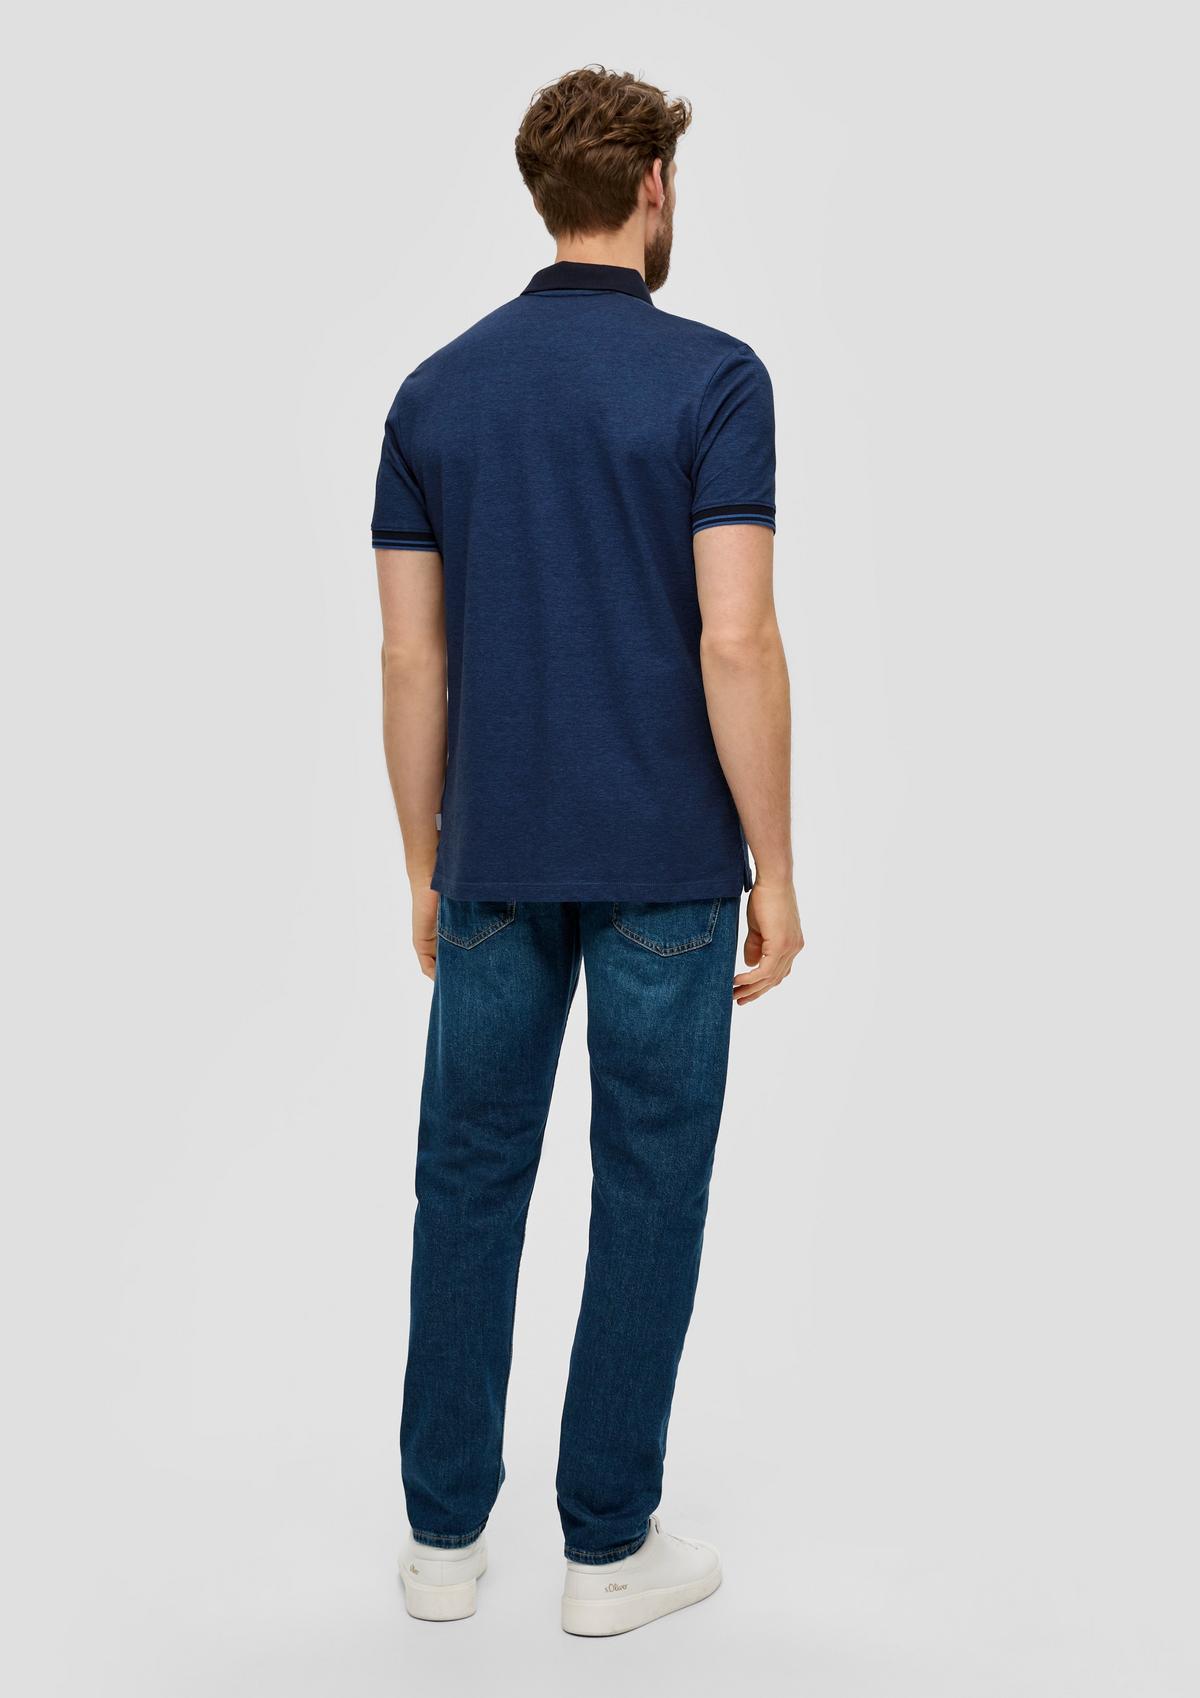 s.Oliver Polo shirt in a cotton blend